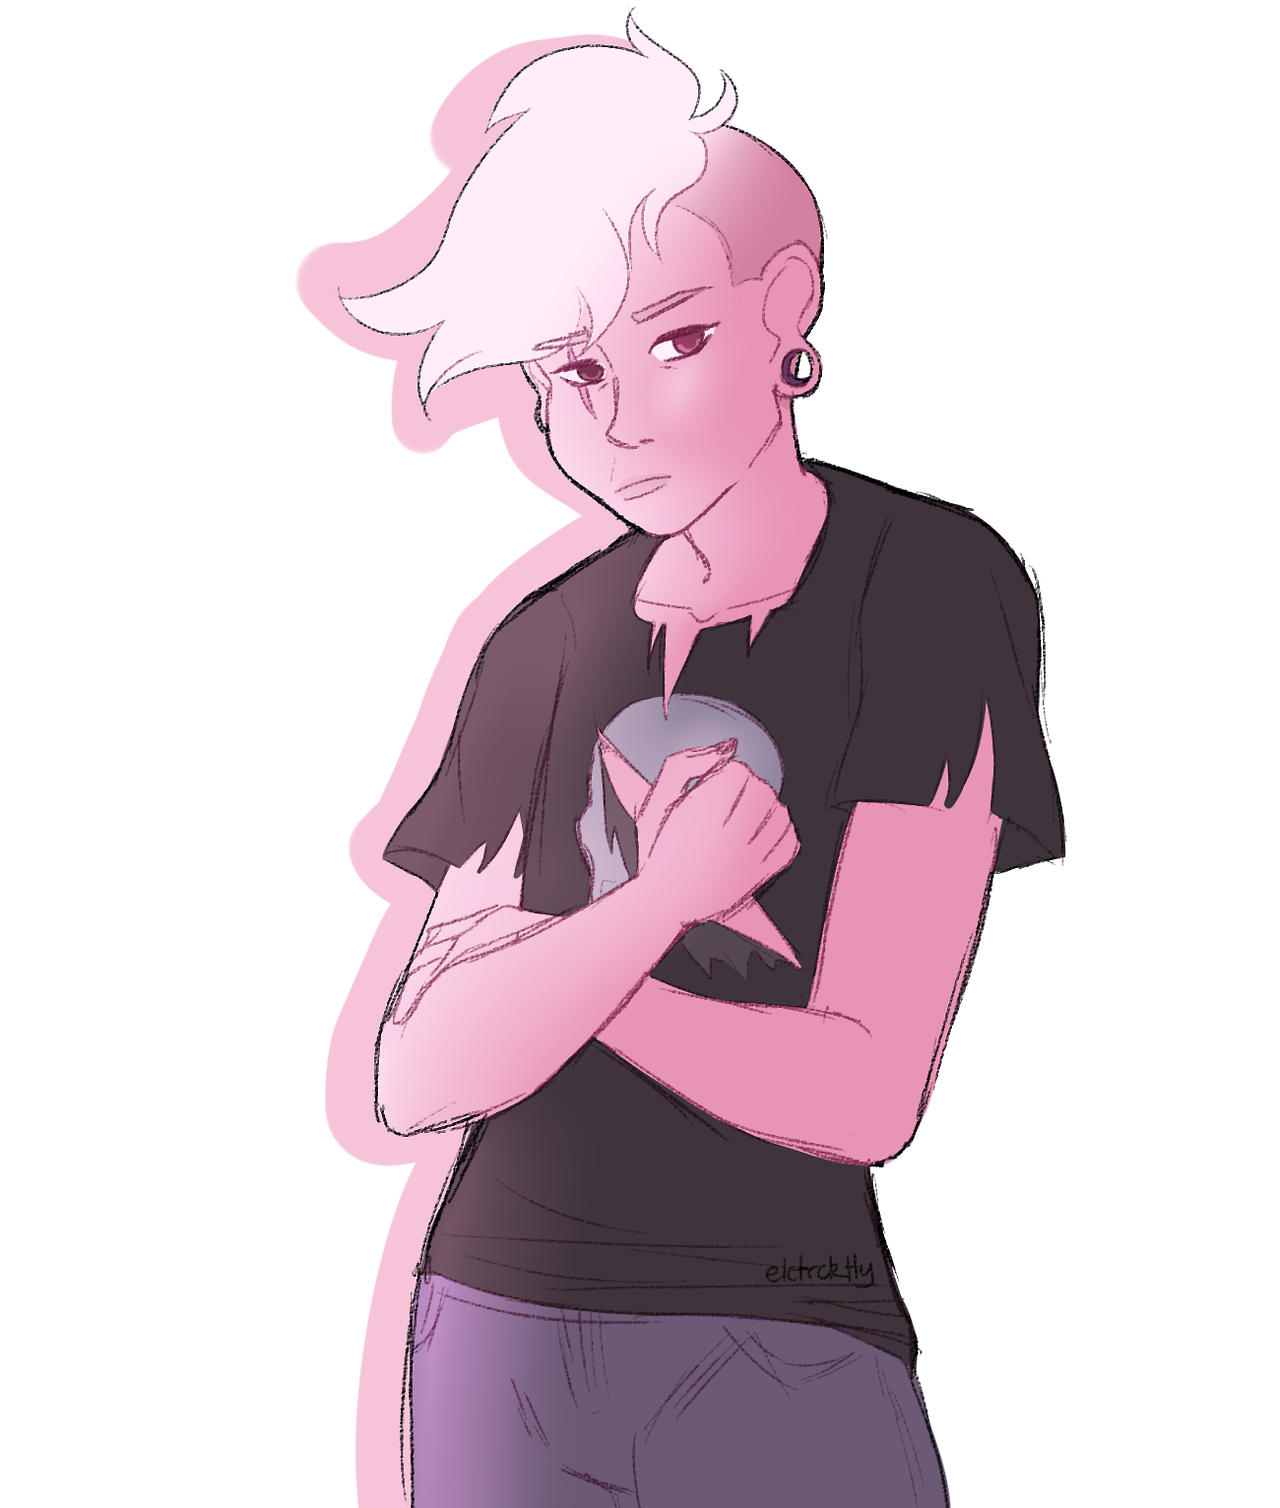 shoutout to lars for making me draw su fanart for the first time in like idk probably a year